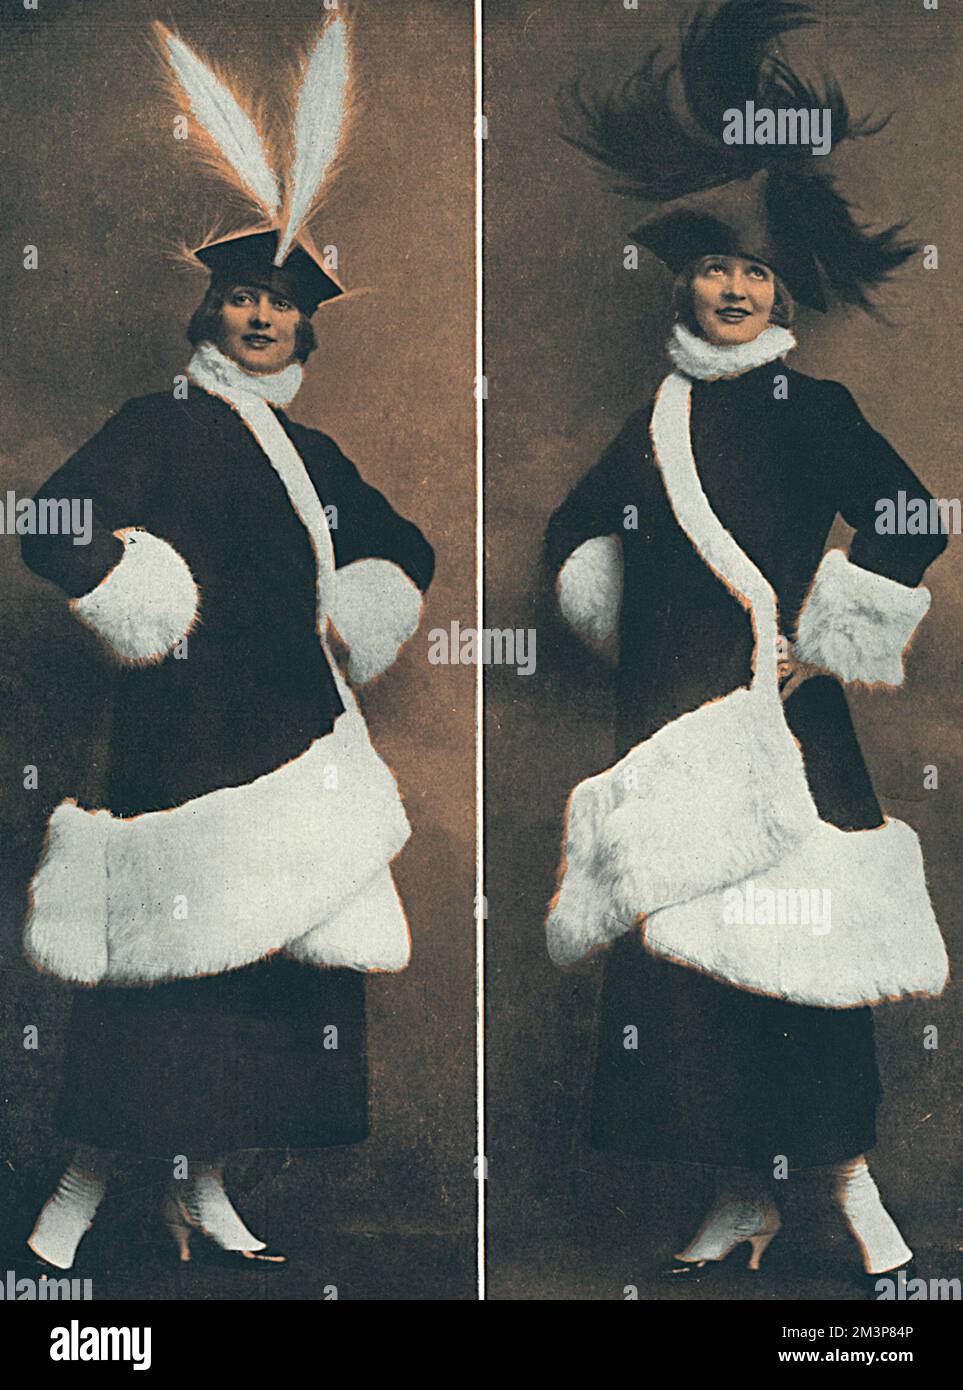 Gaby Deslys (1884 - 1920), French actress, music hall artiste and sometime lover of King Manuel II of Portugal, pictured in 1917 after recovering from a severe illness and before performing into a new revue, Saucy Suzette in which she played the title role.     Date: 1917 Stock Photo